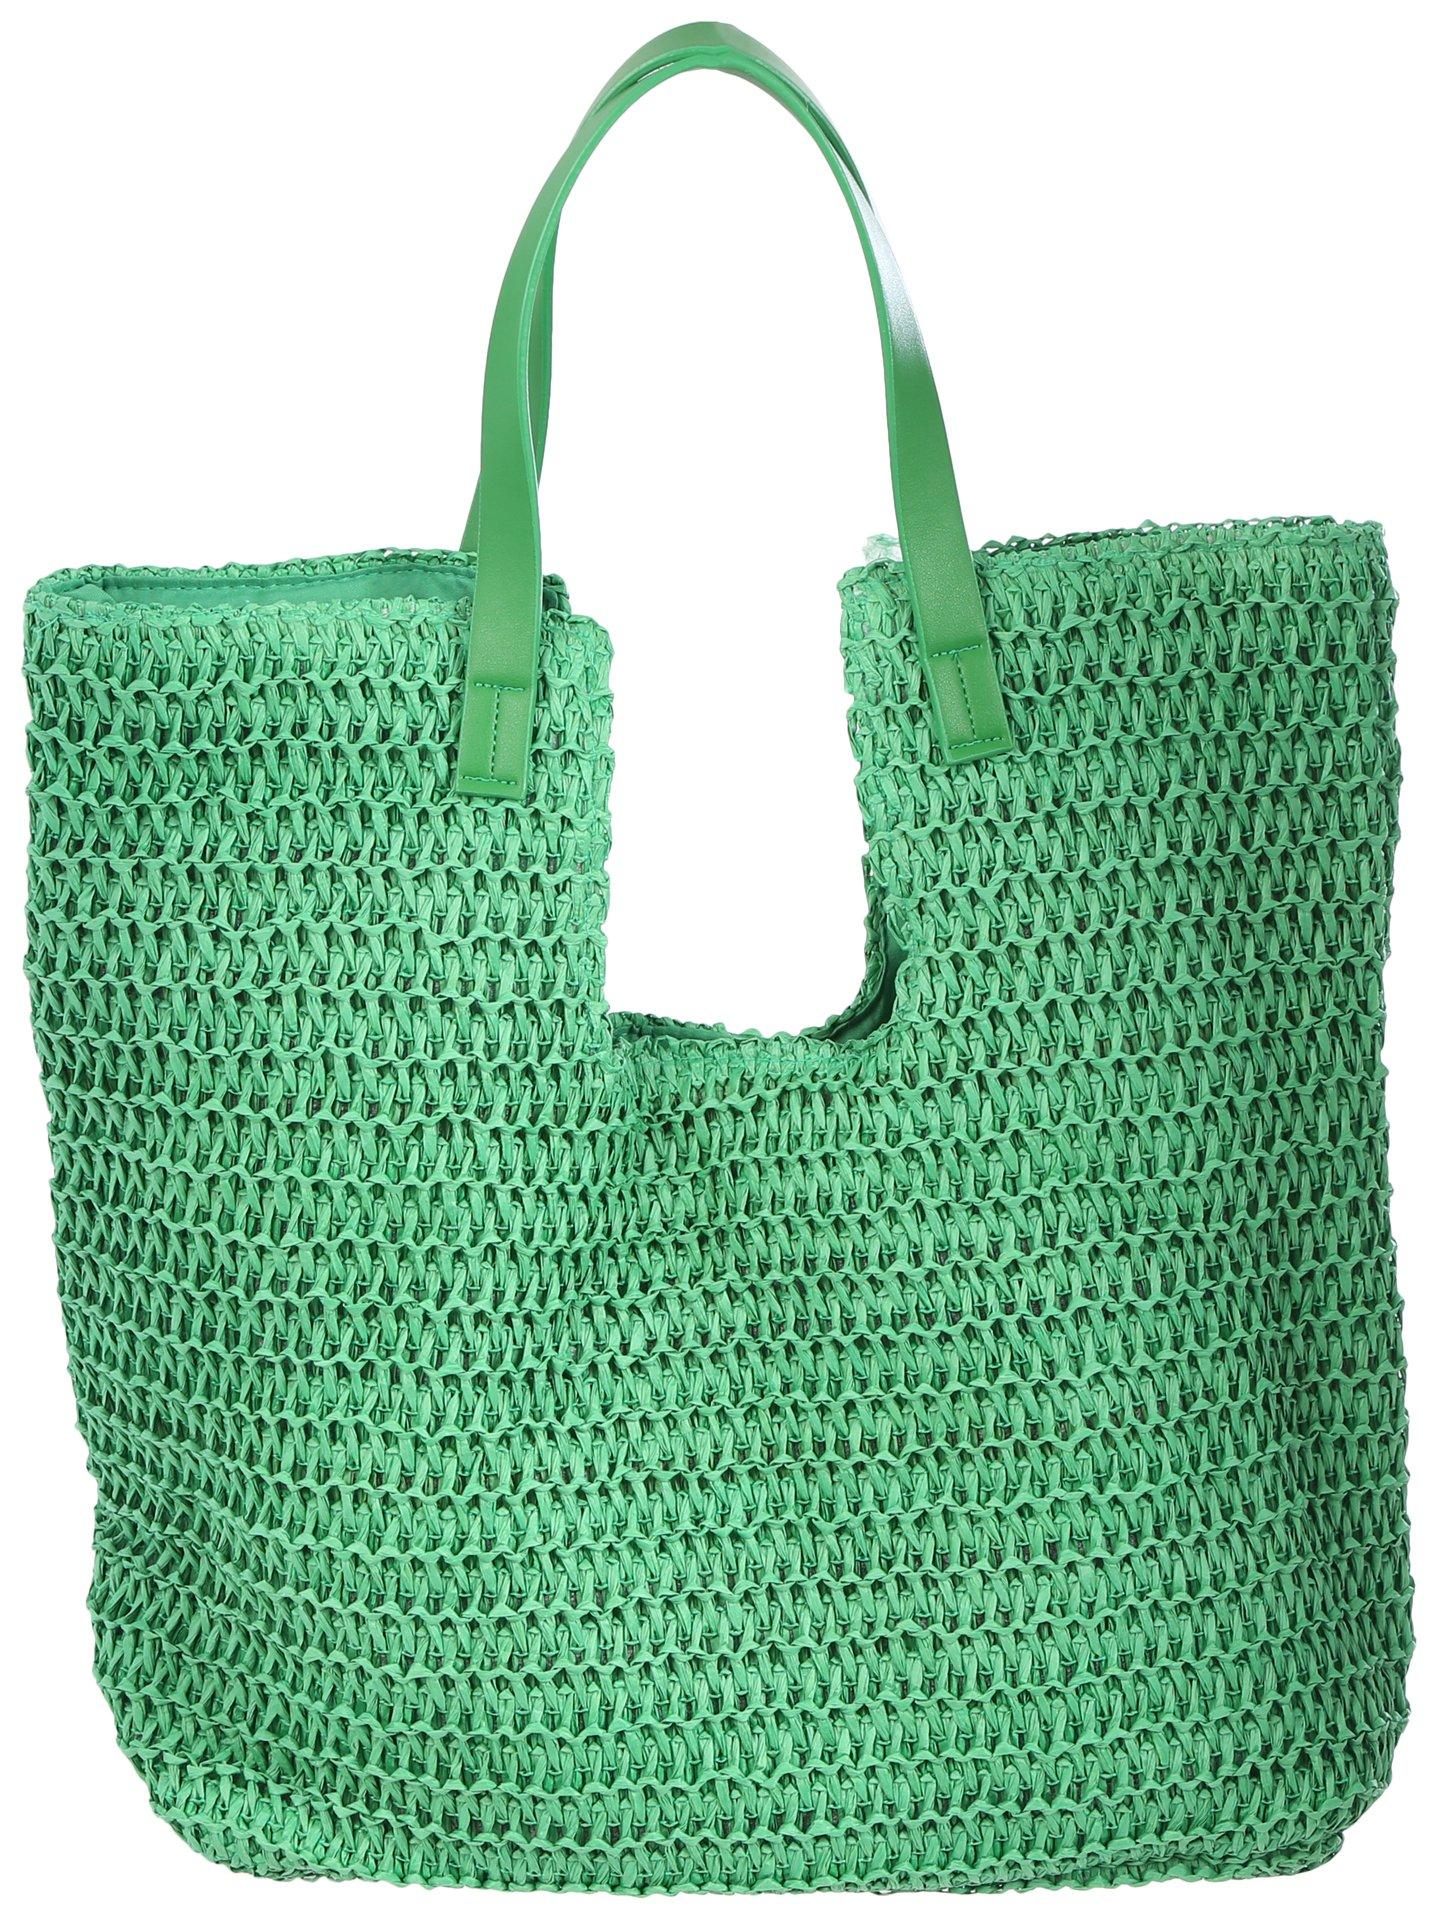 Urban Expressions Island Woven Tote Bag